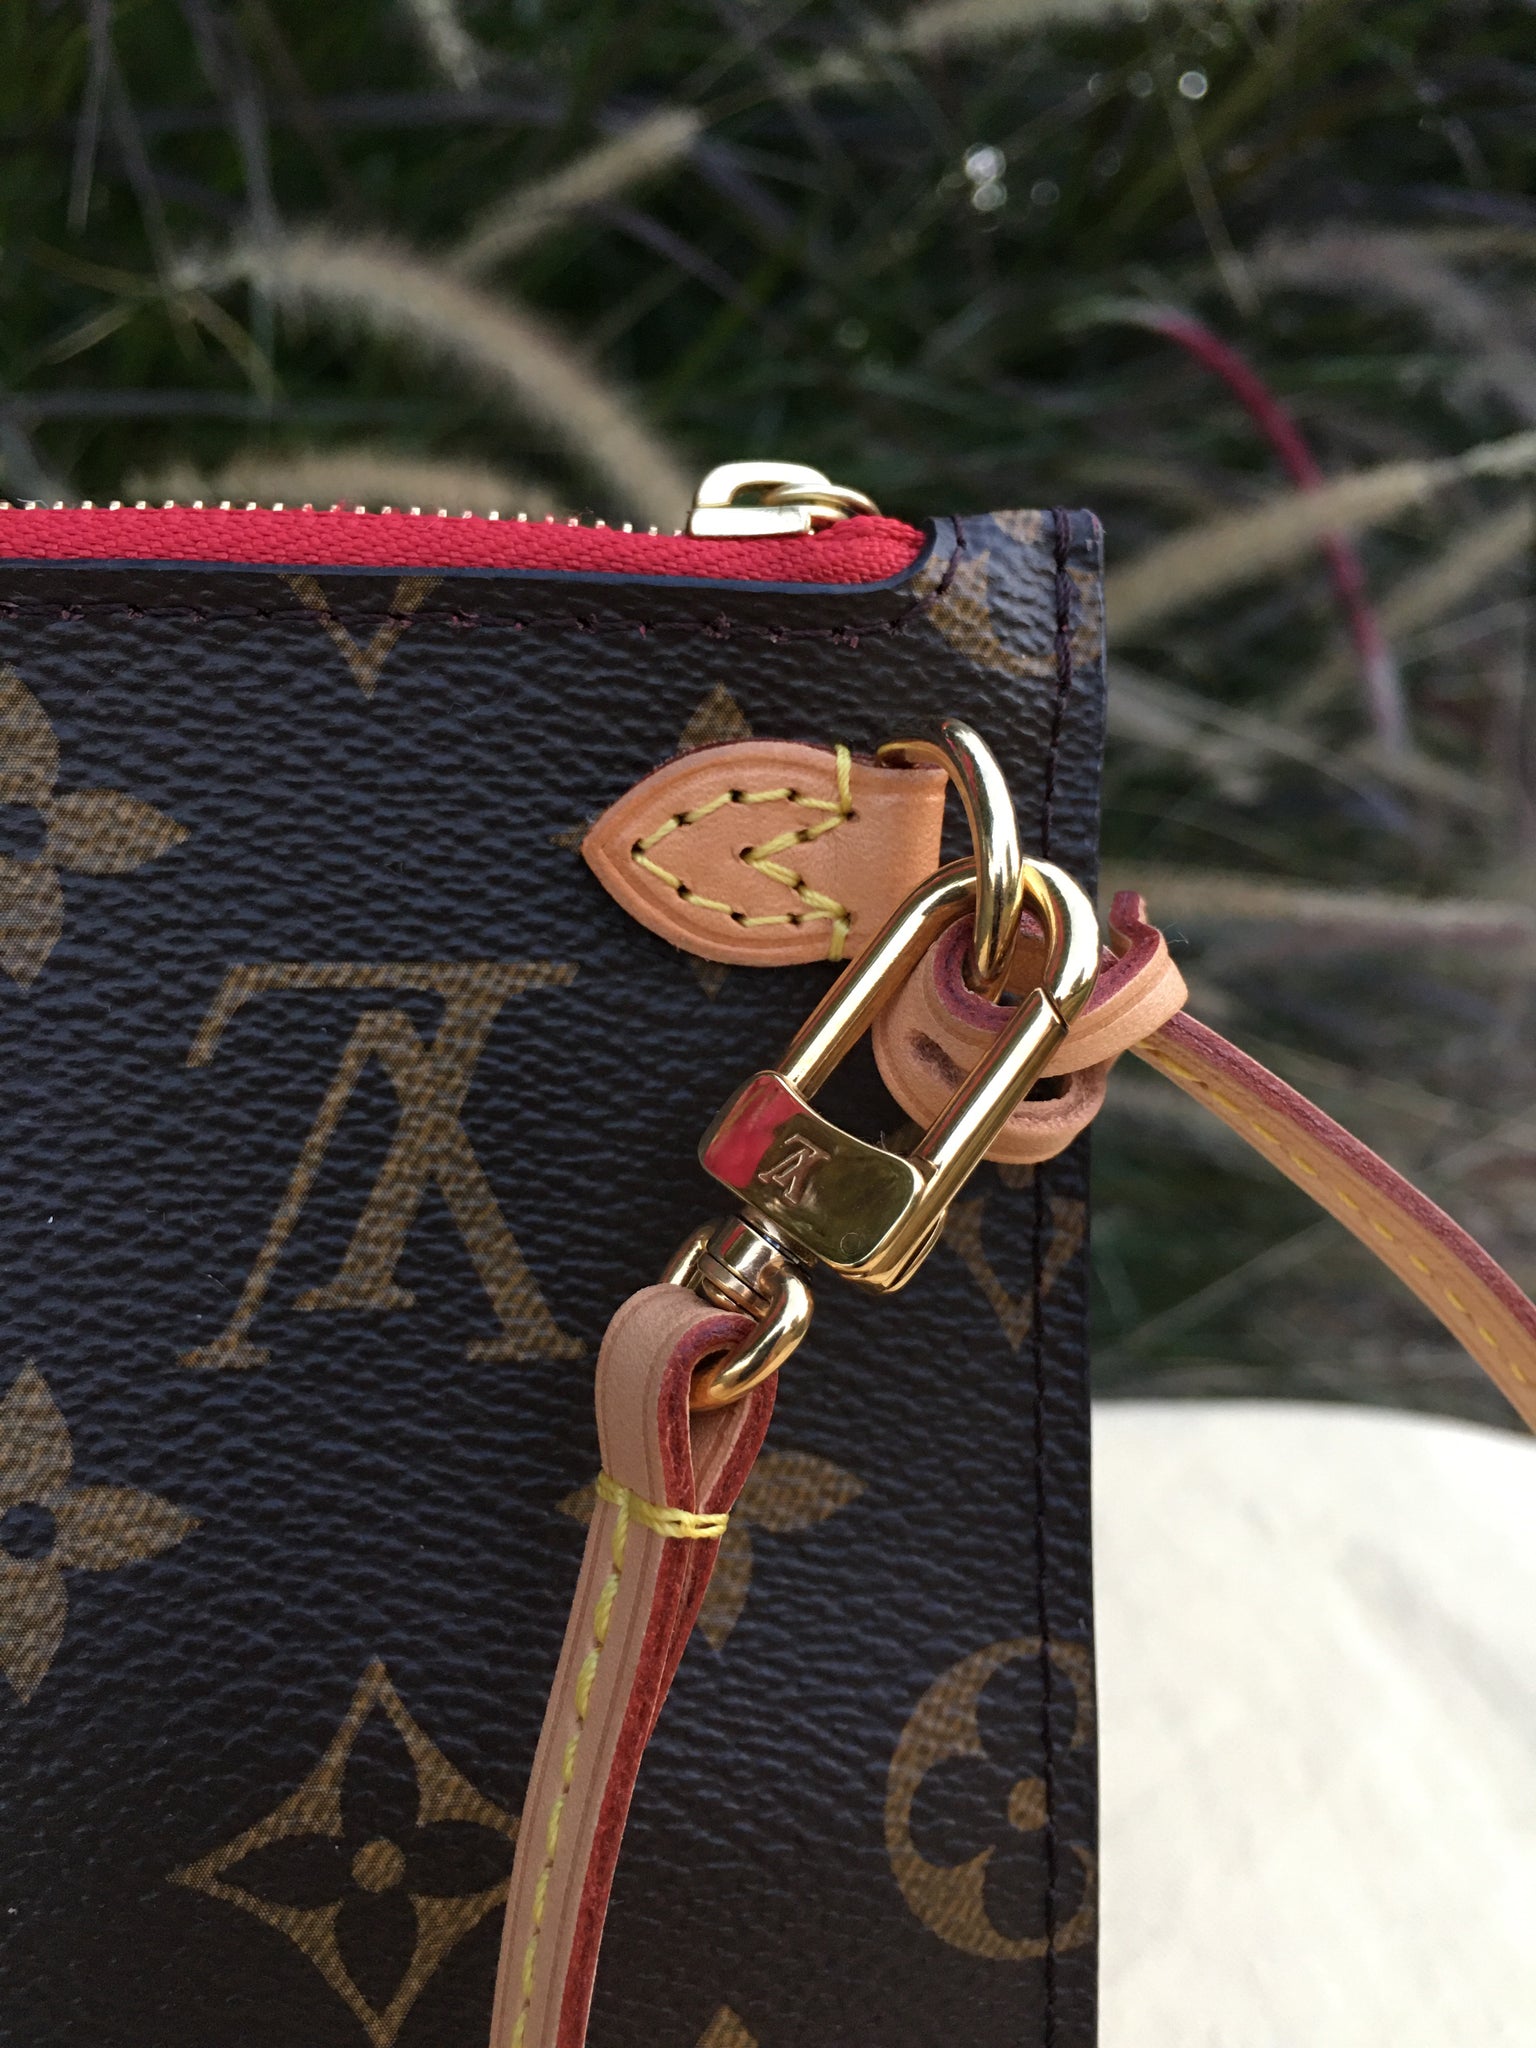 Louis Vuitton Neverfull MM Cherry Lining for Sale in Bellevue, WA